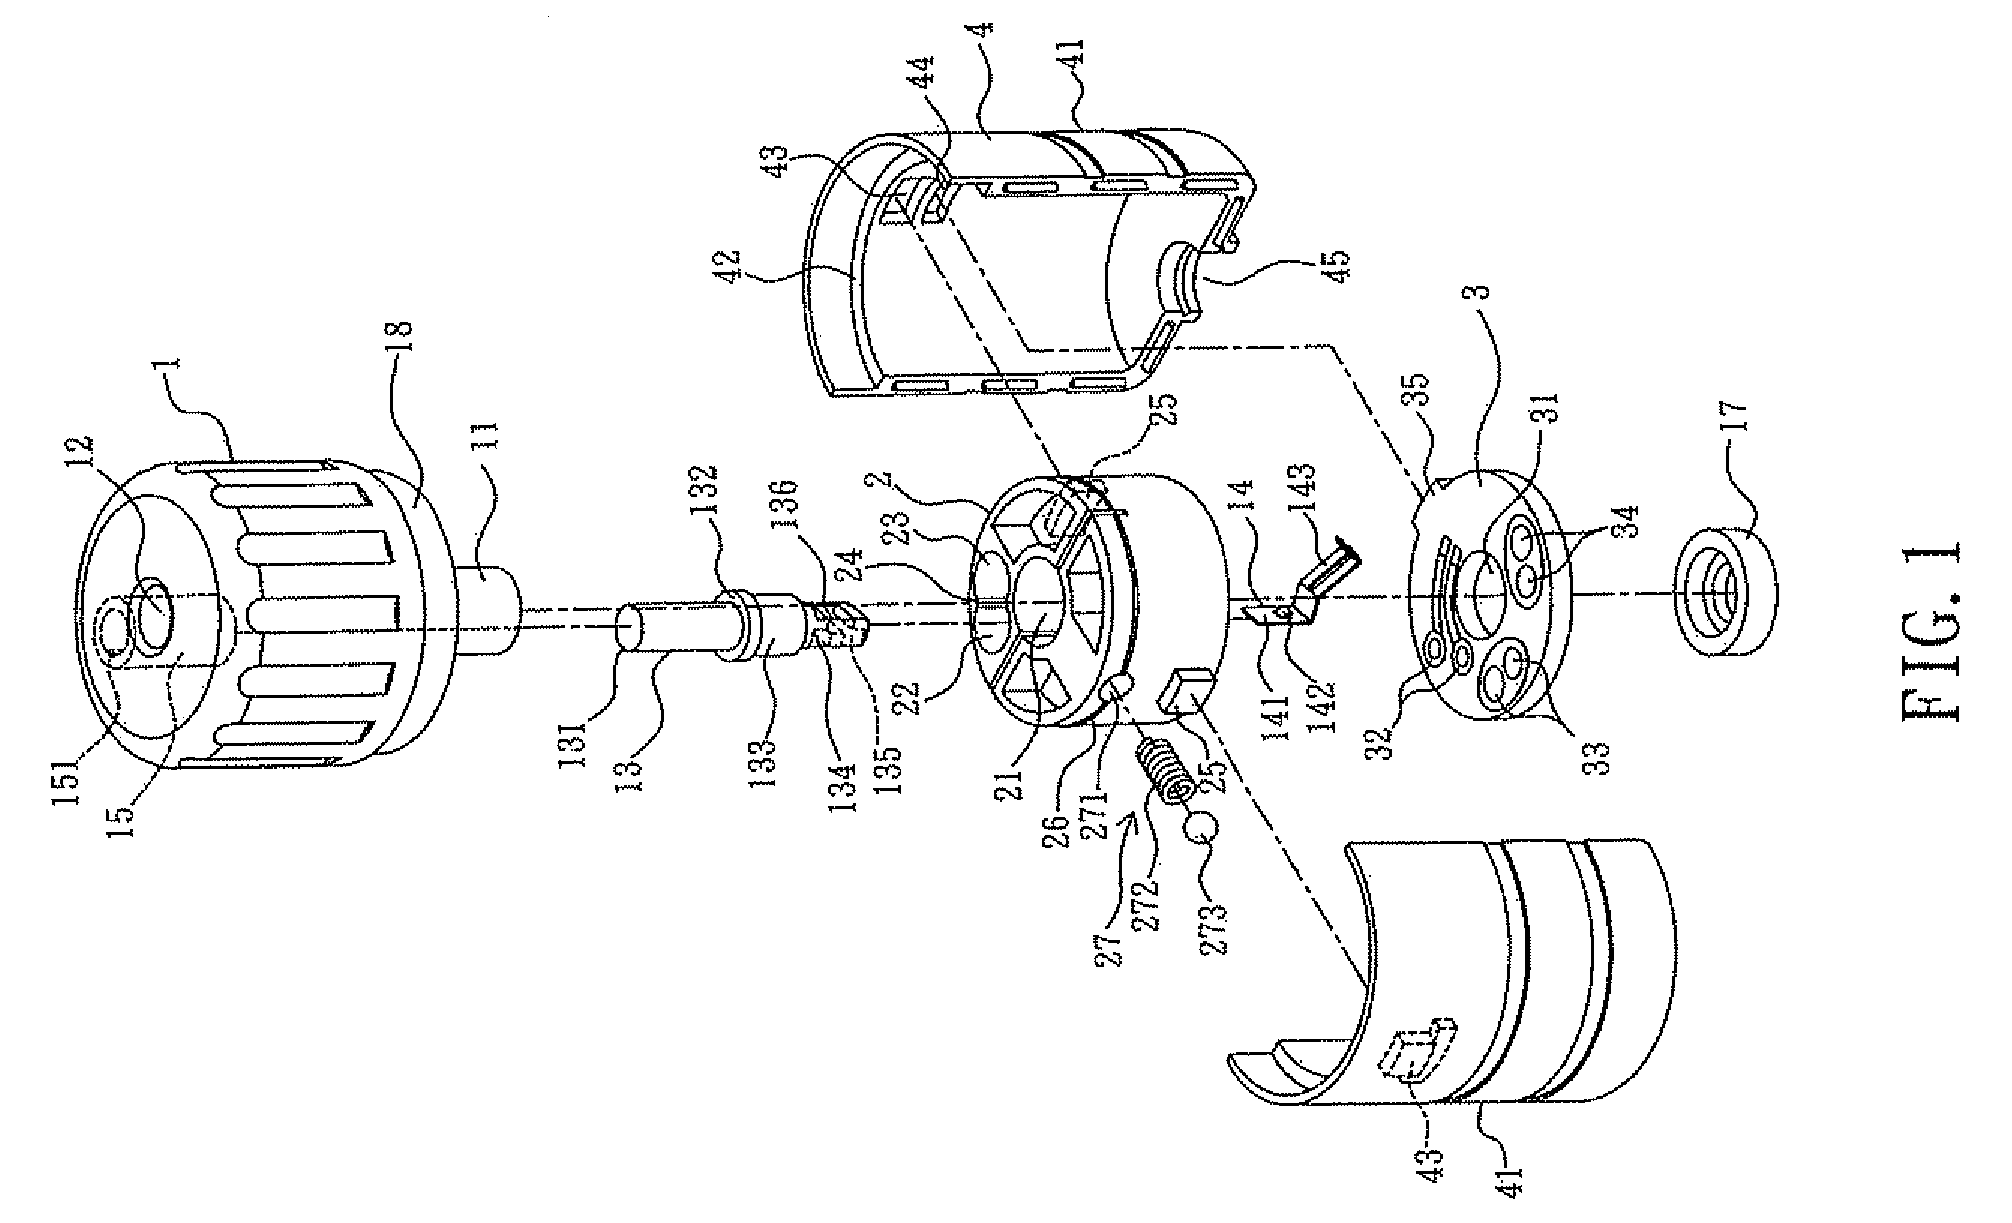 Axially-movable rotary switch